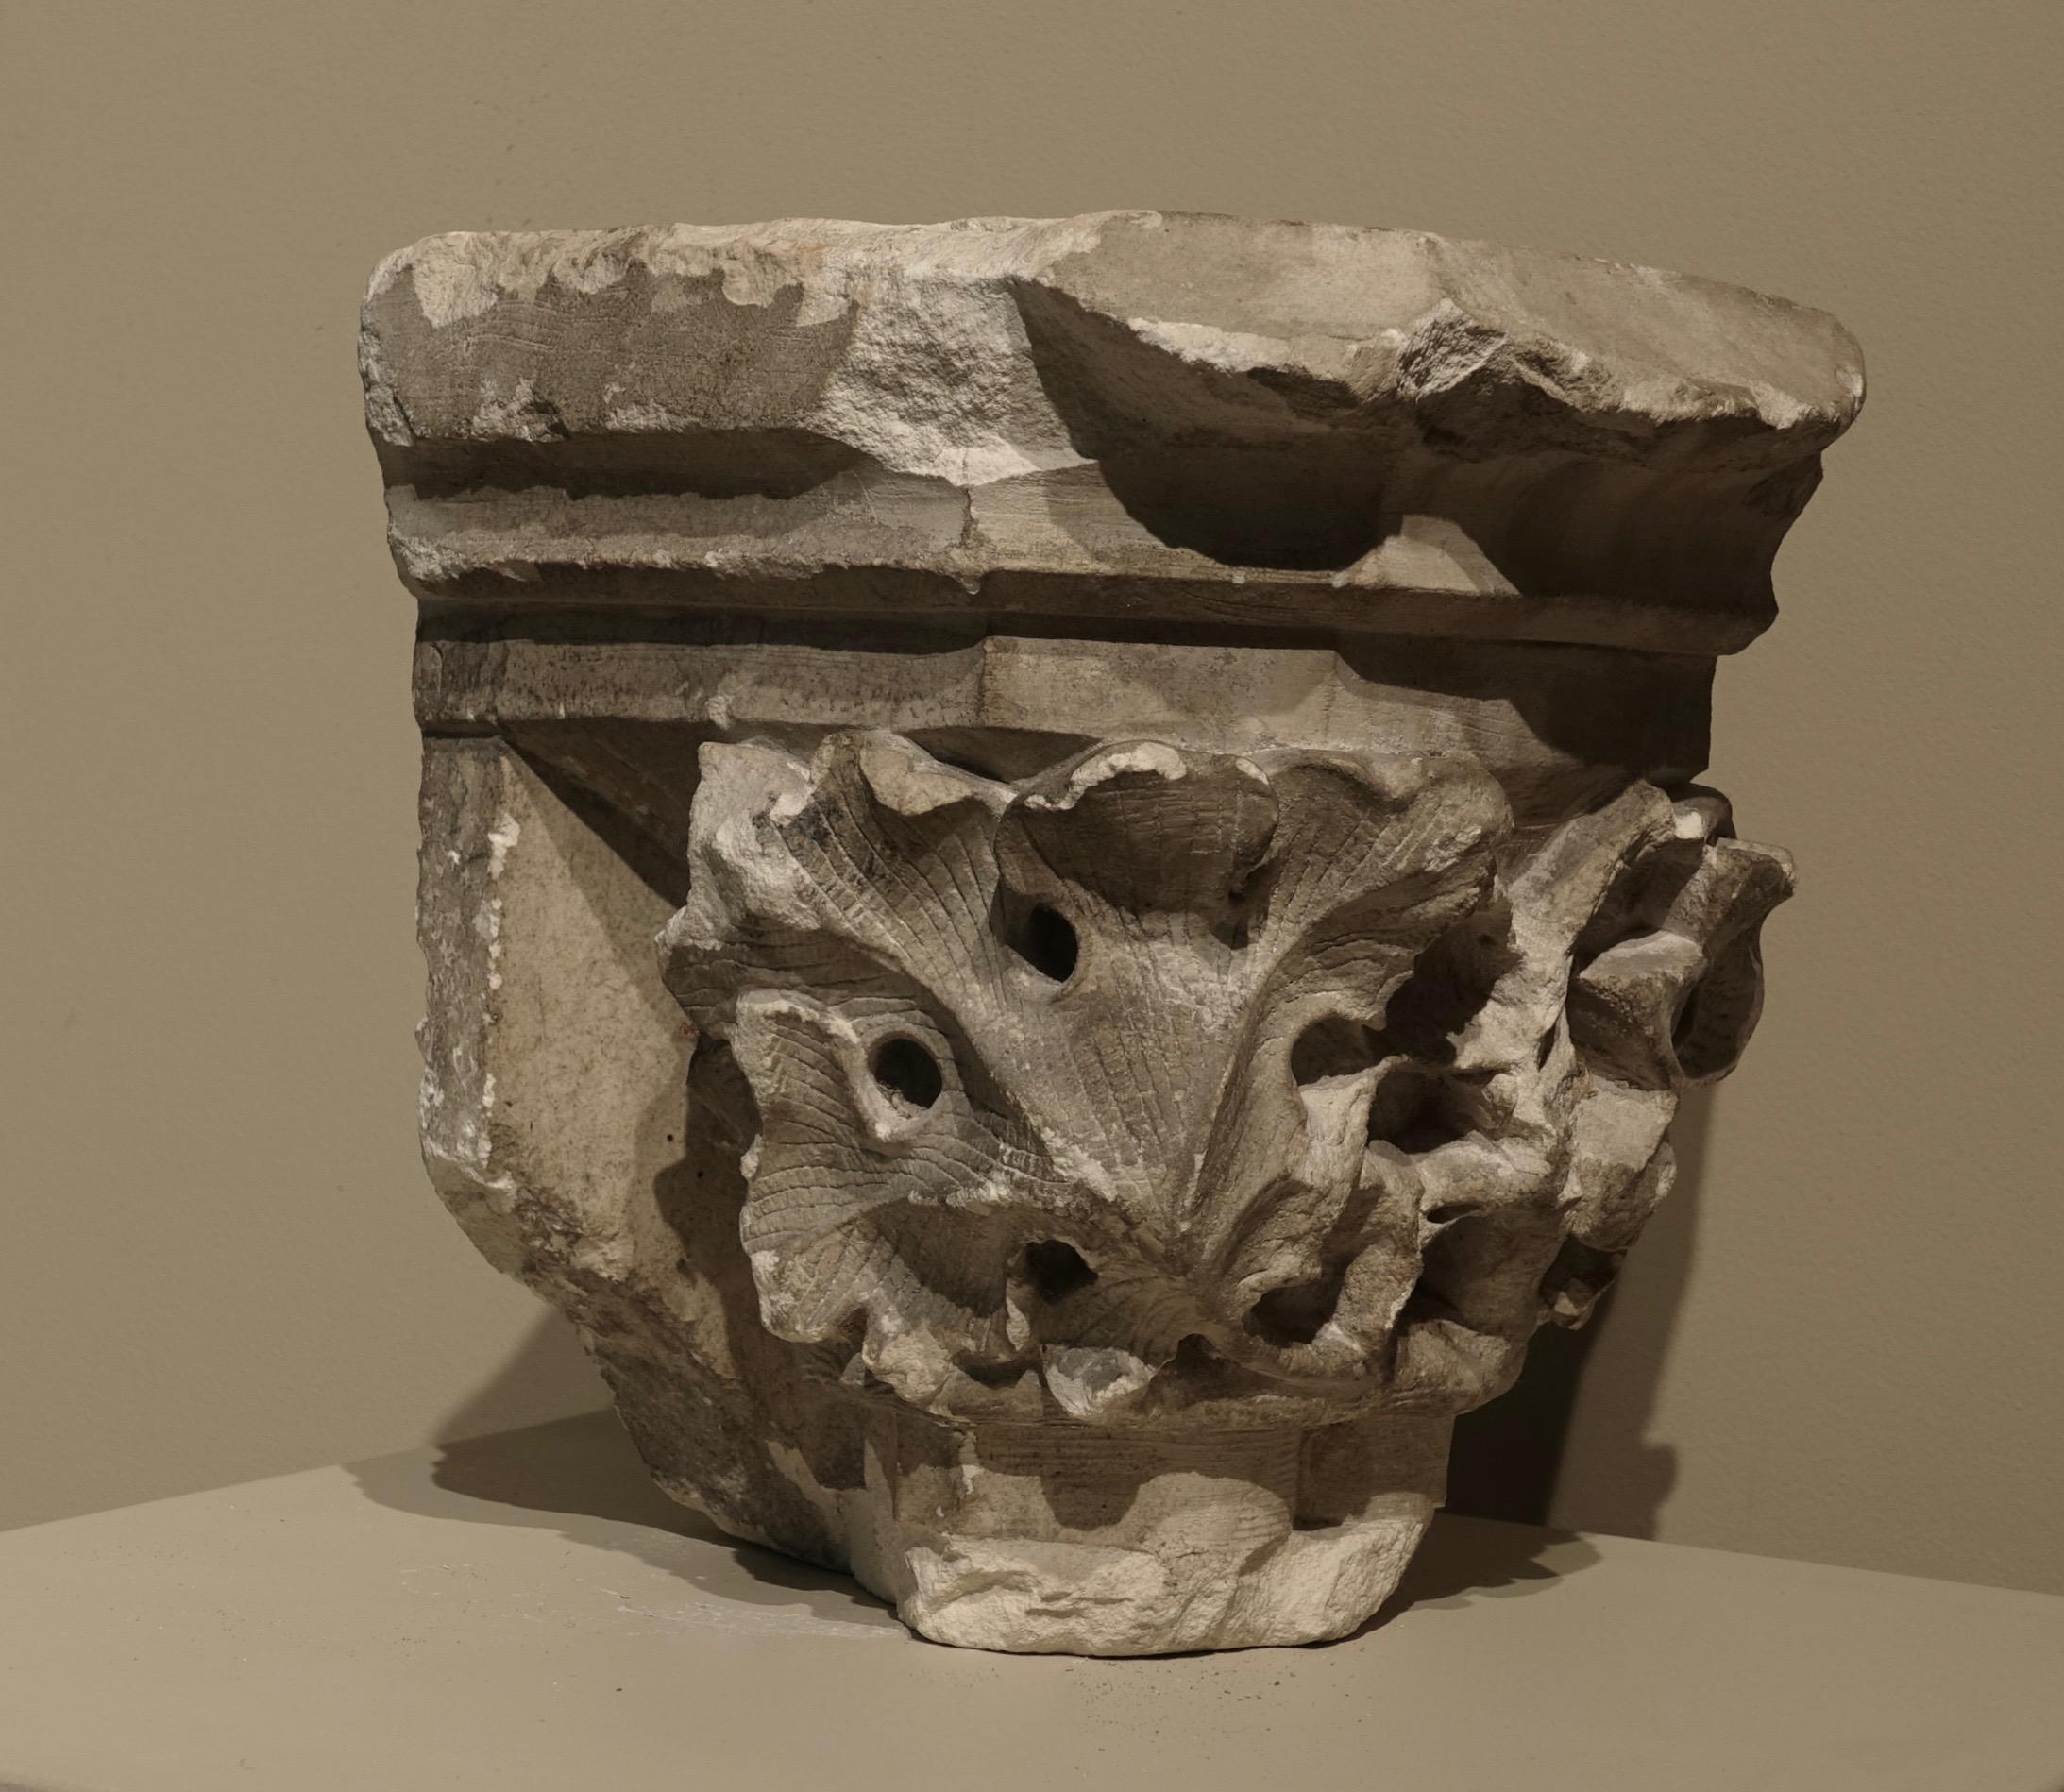 Gothic capital with foliate decoration
France, limestone
13th century
16.5 x 17 x 12.5 cm


The leaves are organically arranged around the core of the abacus; the bottom of the capital is composed of a simple rounded base. The capital is flat